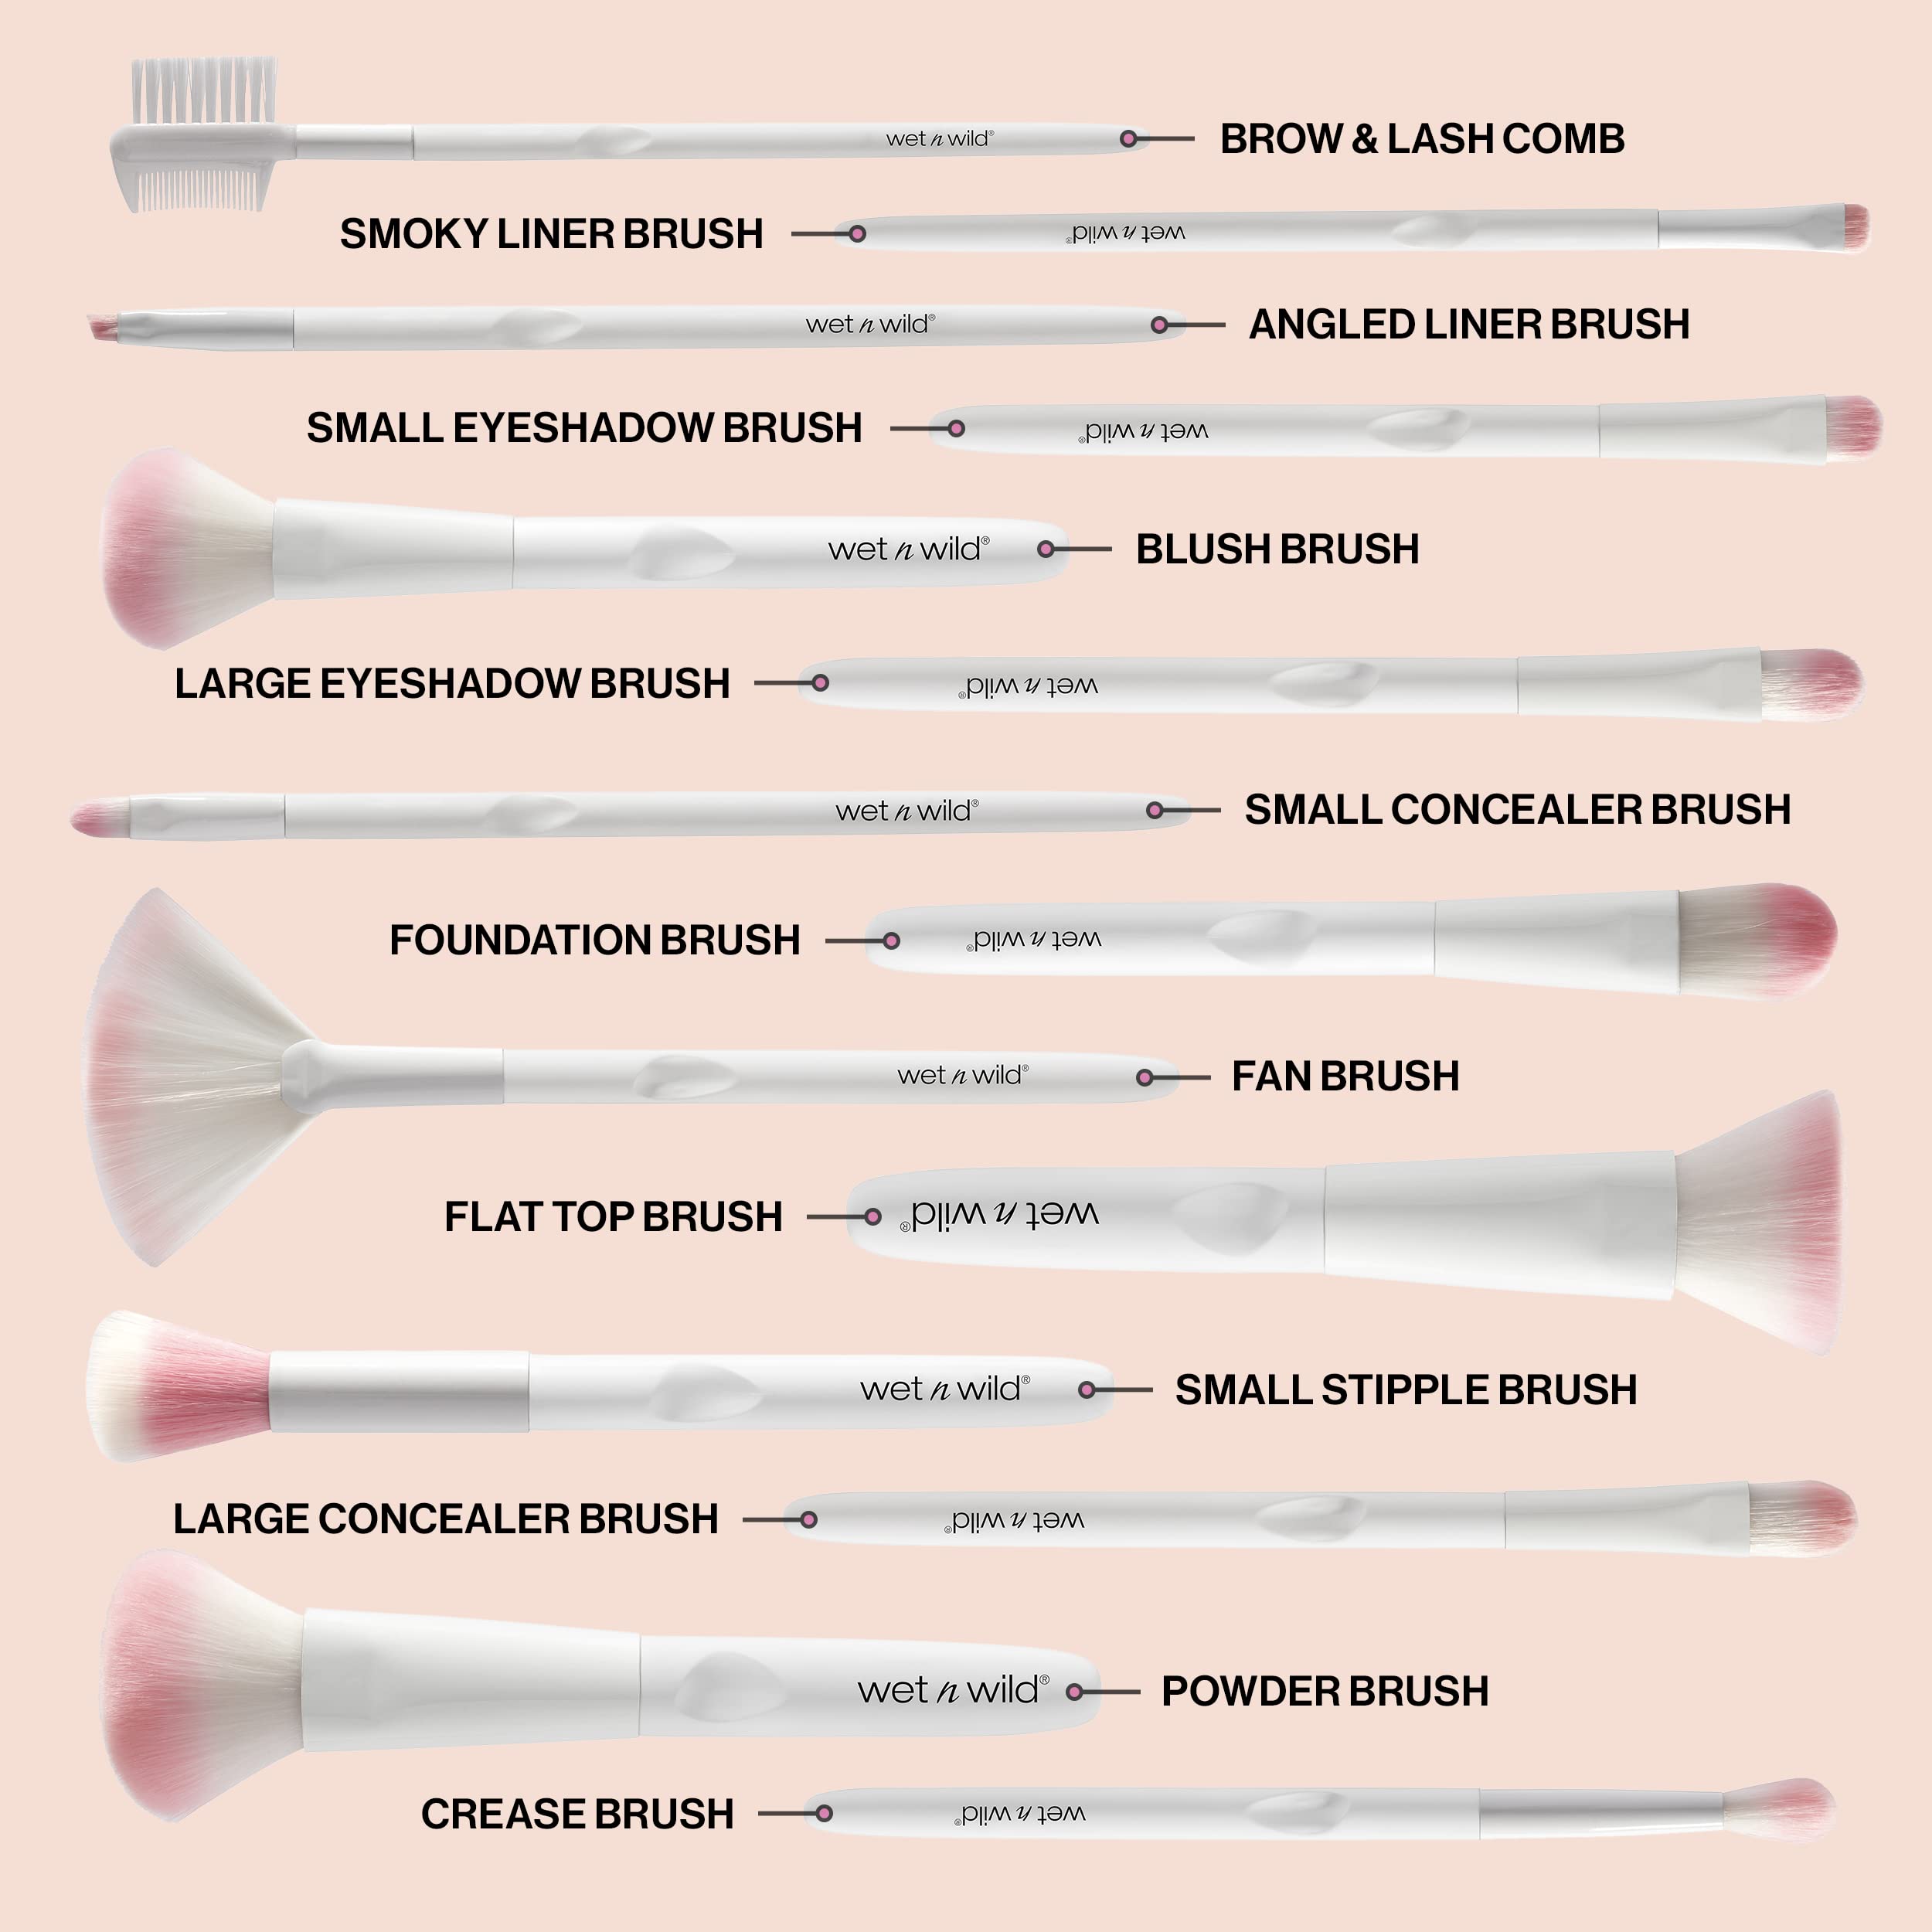 wet n wild Makeup Brush| Small Concealer Brush| For Under Eye & Eyebrows| Liquid and Powder Makeup| Precision Application| Ergonomic Handle